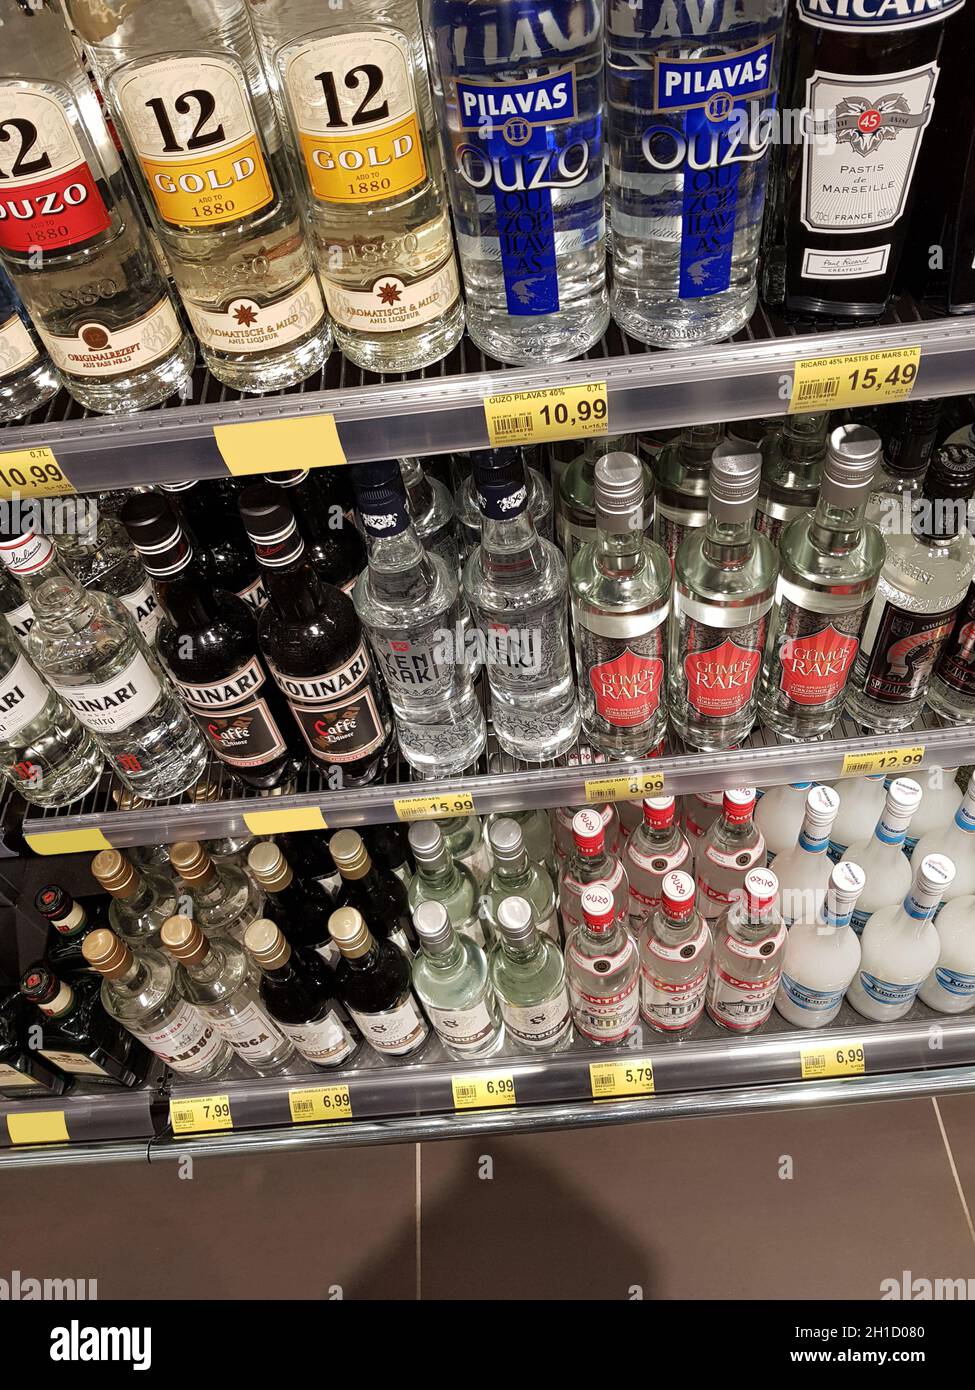 VELBERT, NRW, GERMANY - MAY 18,208: Shopping in a supermarket, discounters in Germany here the beverage department with high-spirits spirits Shopping Stock Photo